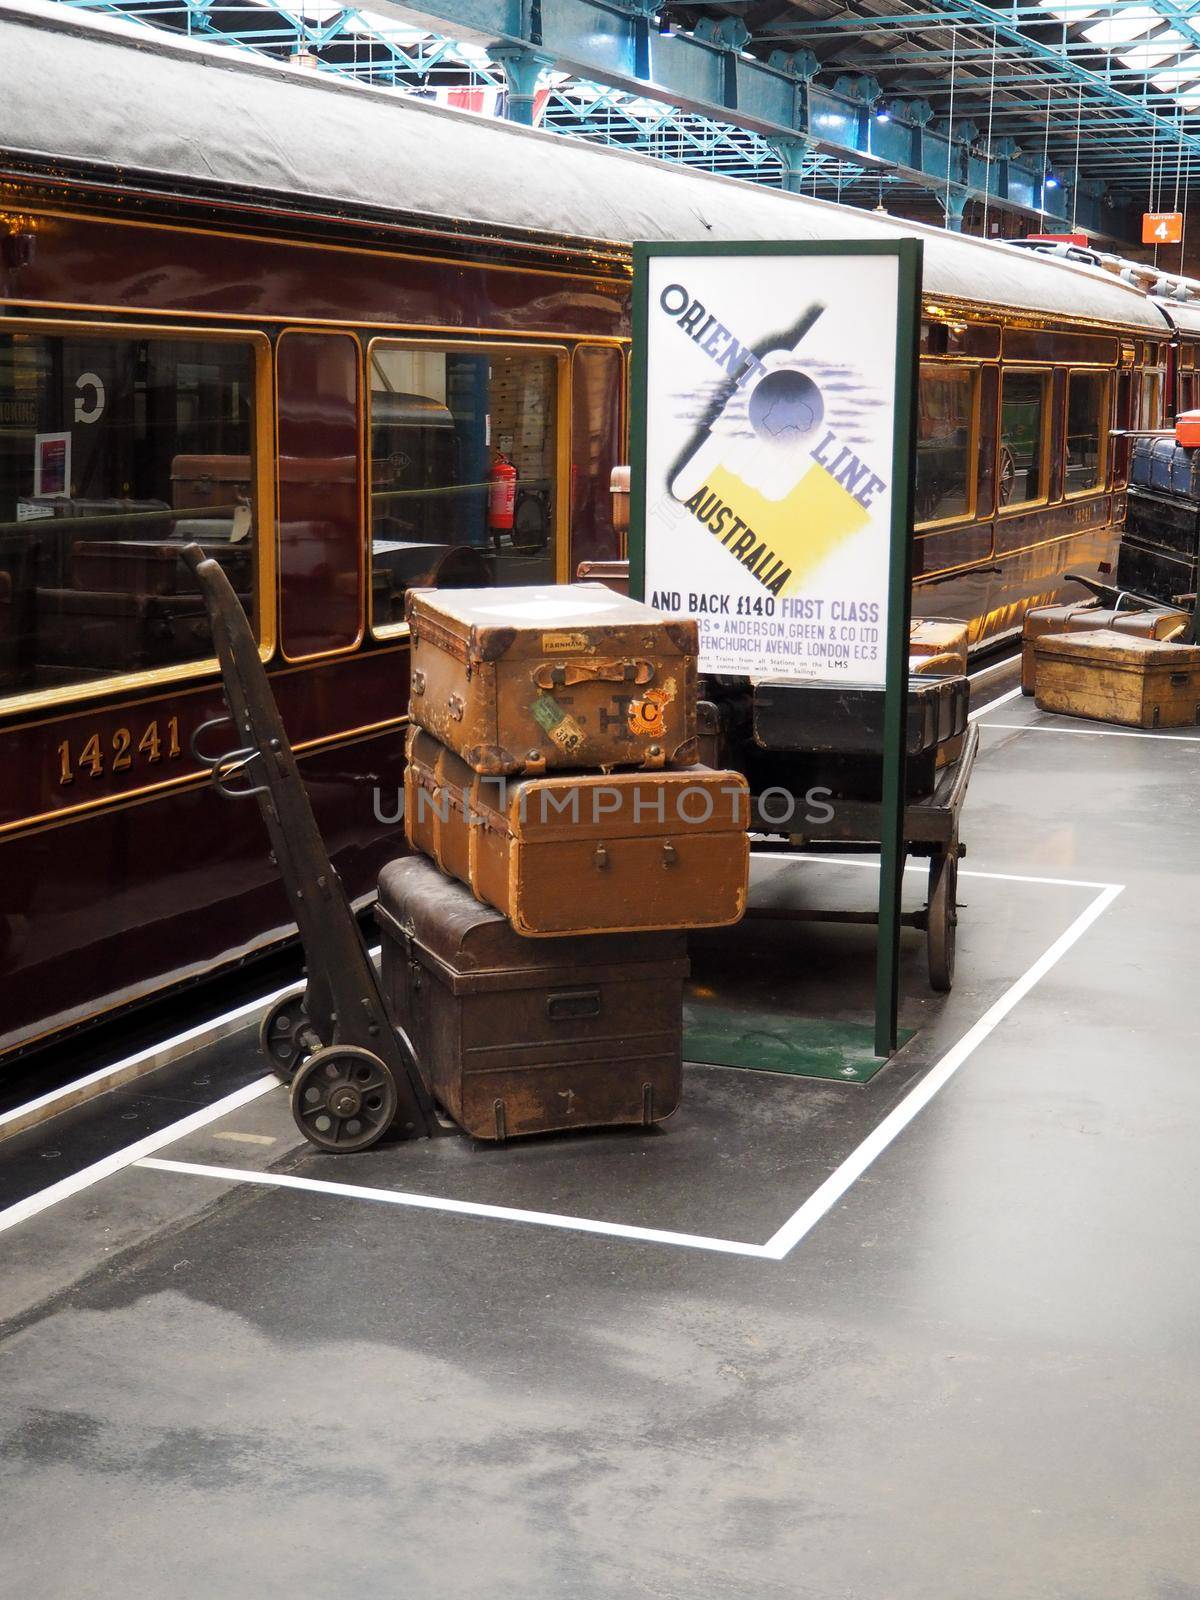 National Railway Museum, York, 1928 railway carriage with antique luggage by PhilHarland